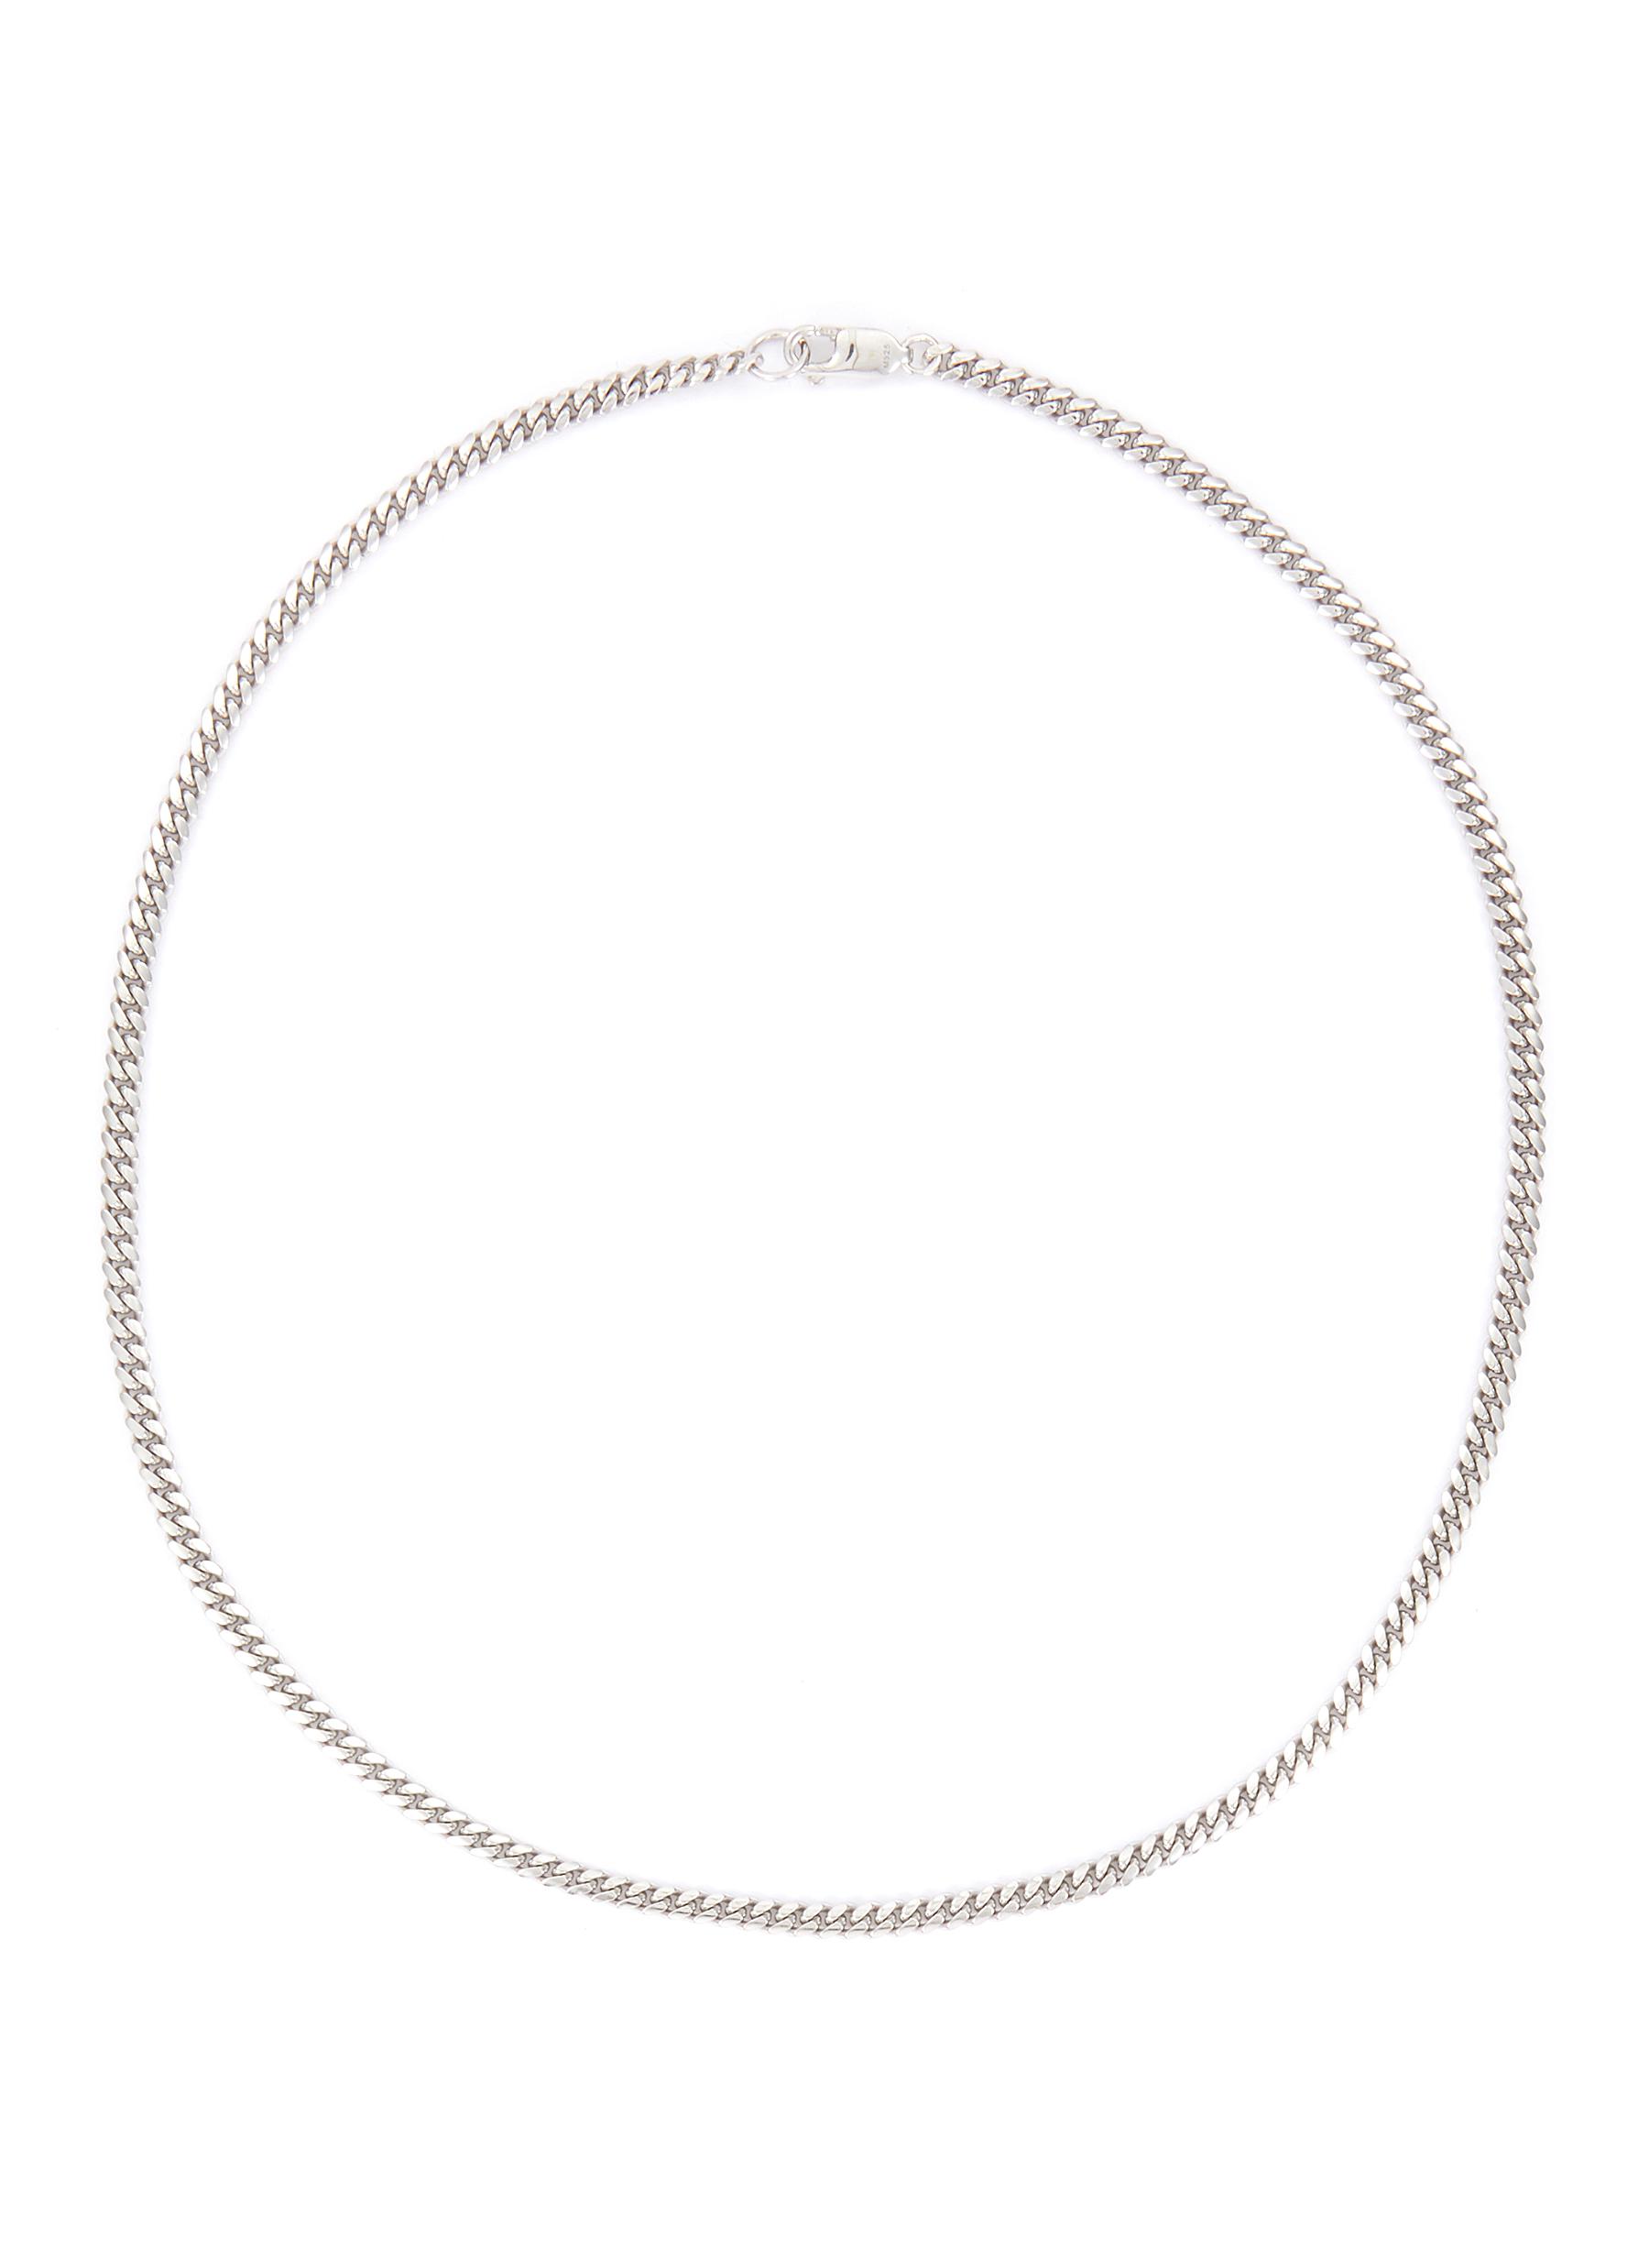 MISSOMA SILVER-TONED METAL ROUND CURB NECKLACE